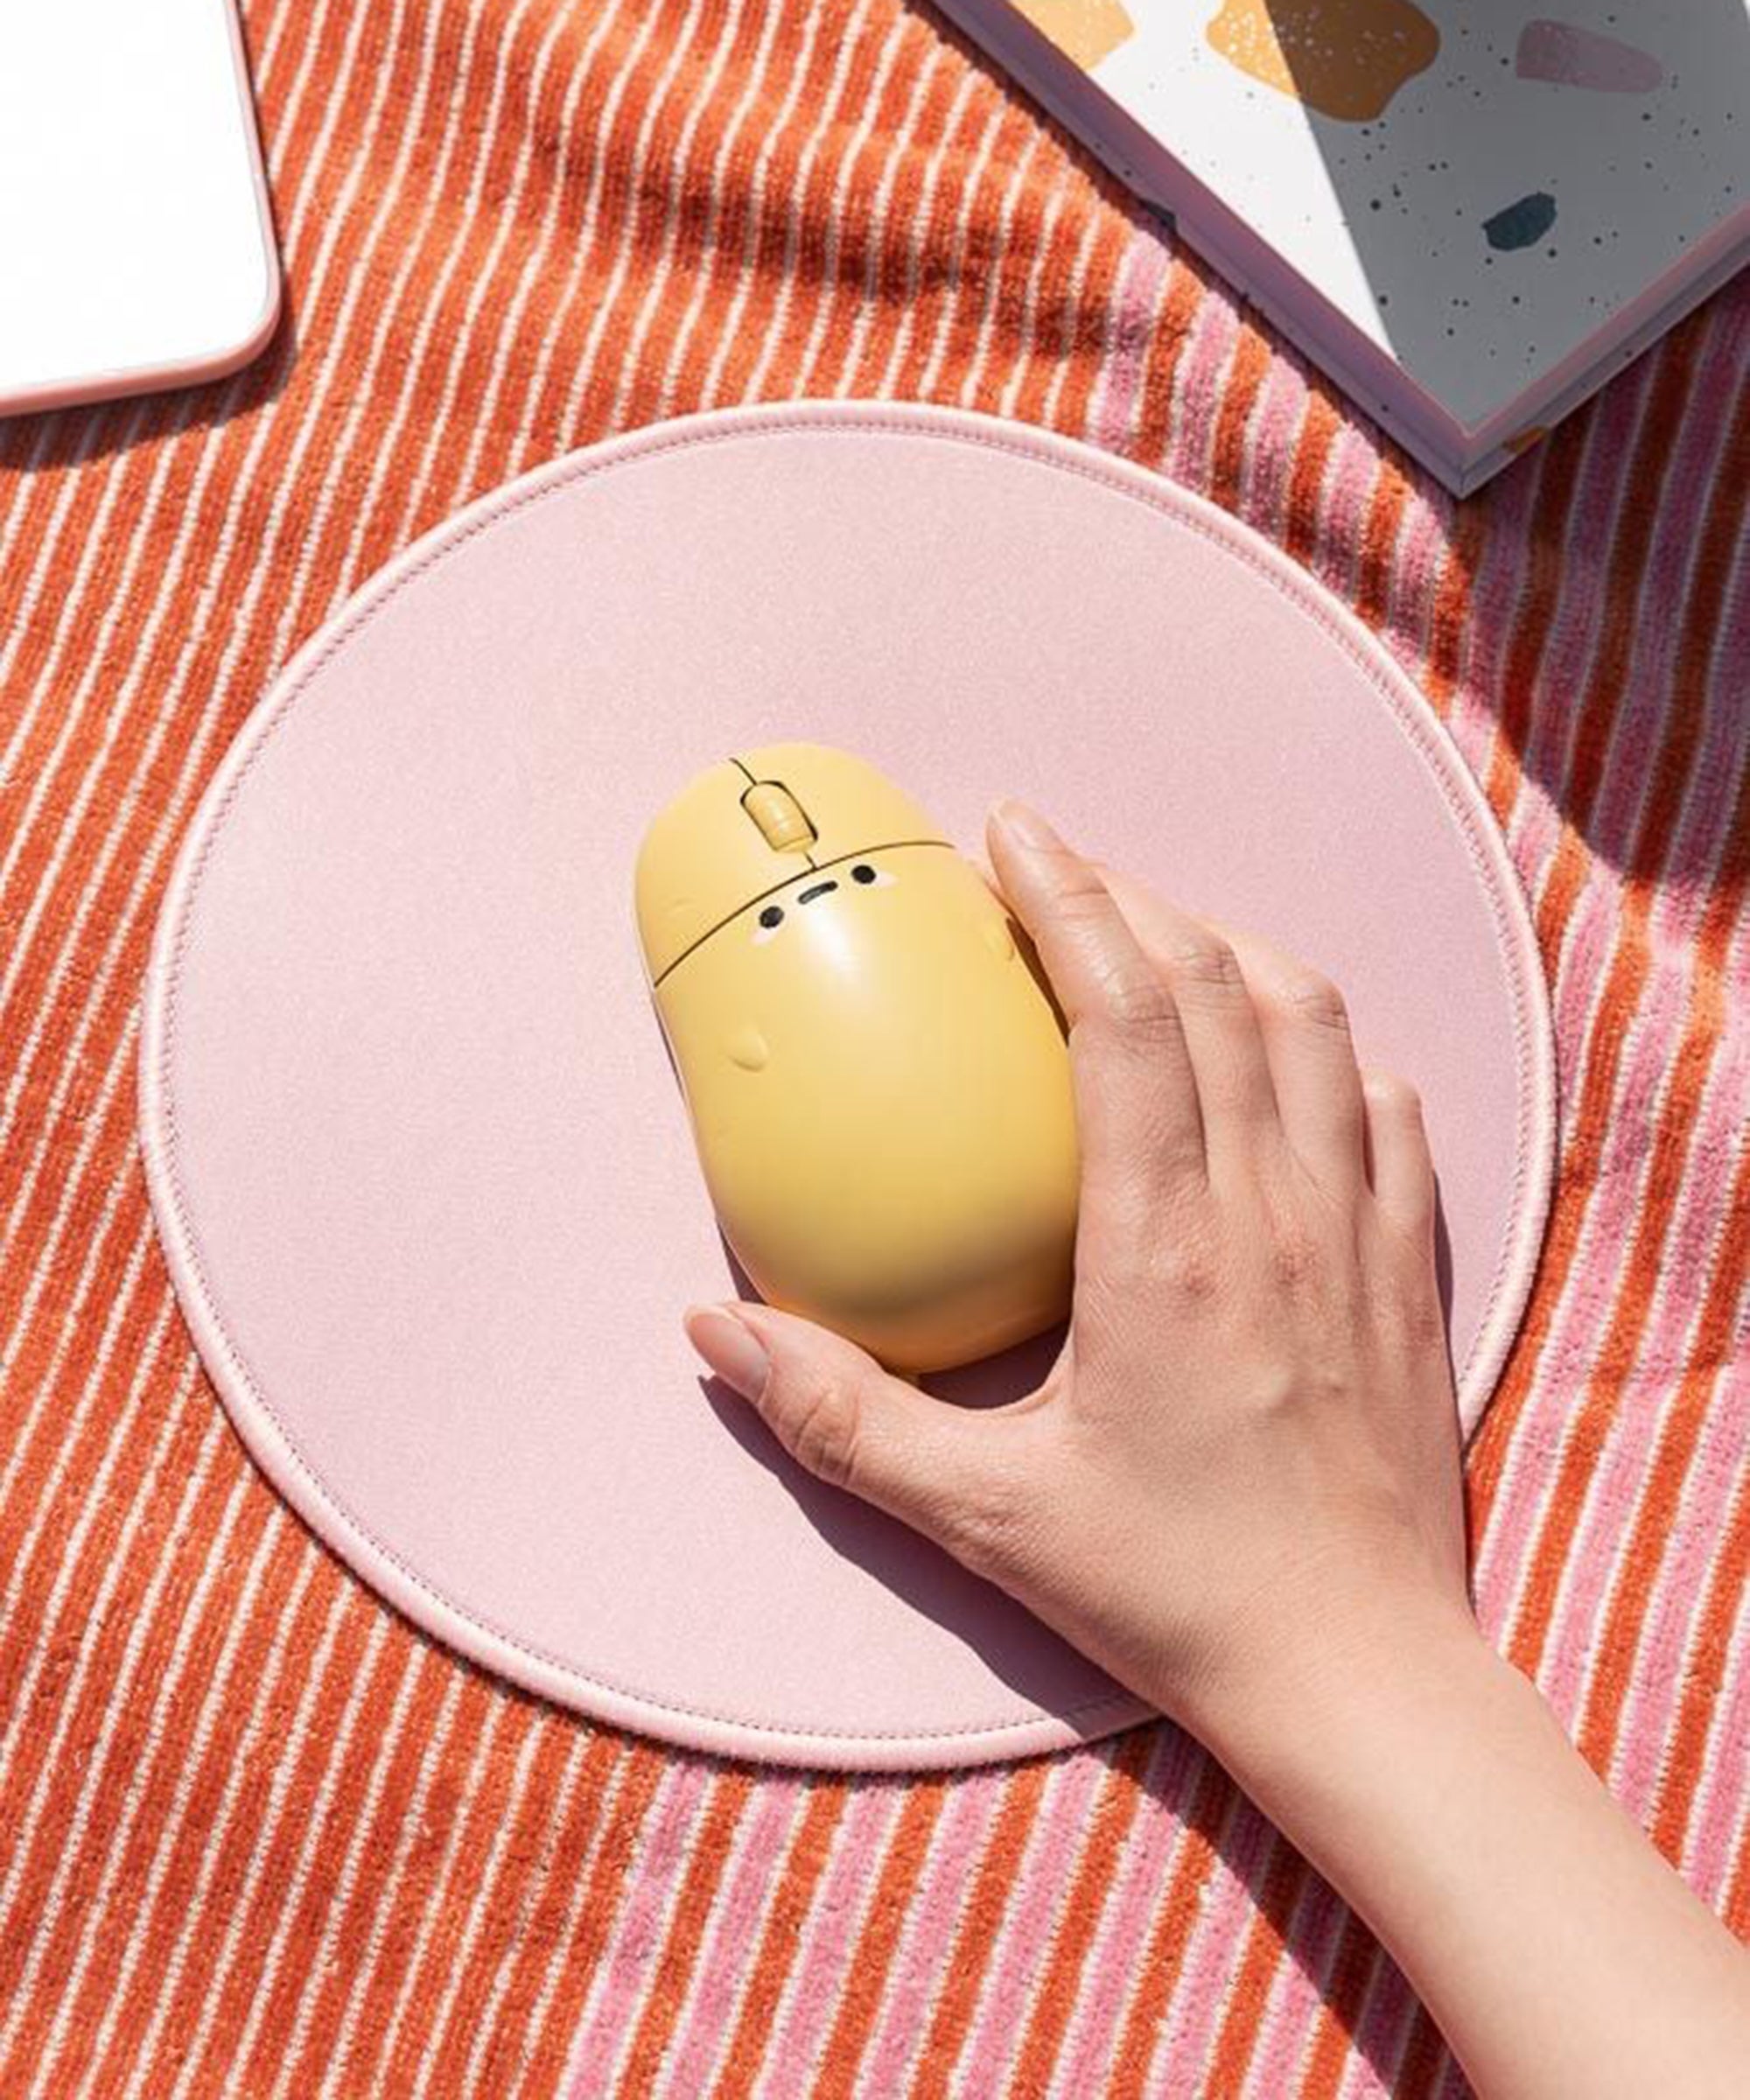 11 Chic and Stylish Desk Accessories to Brighten Your Workspace for Under  $40